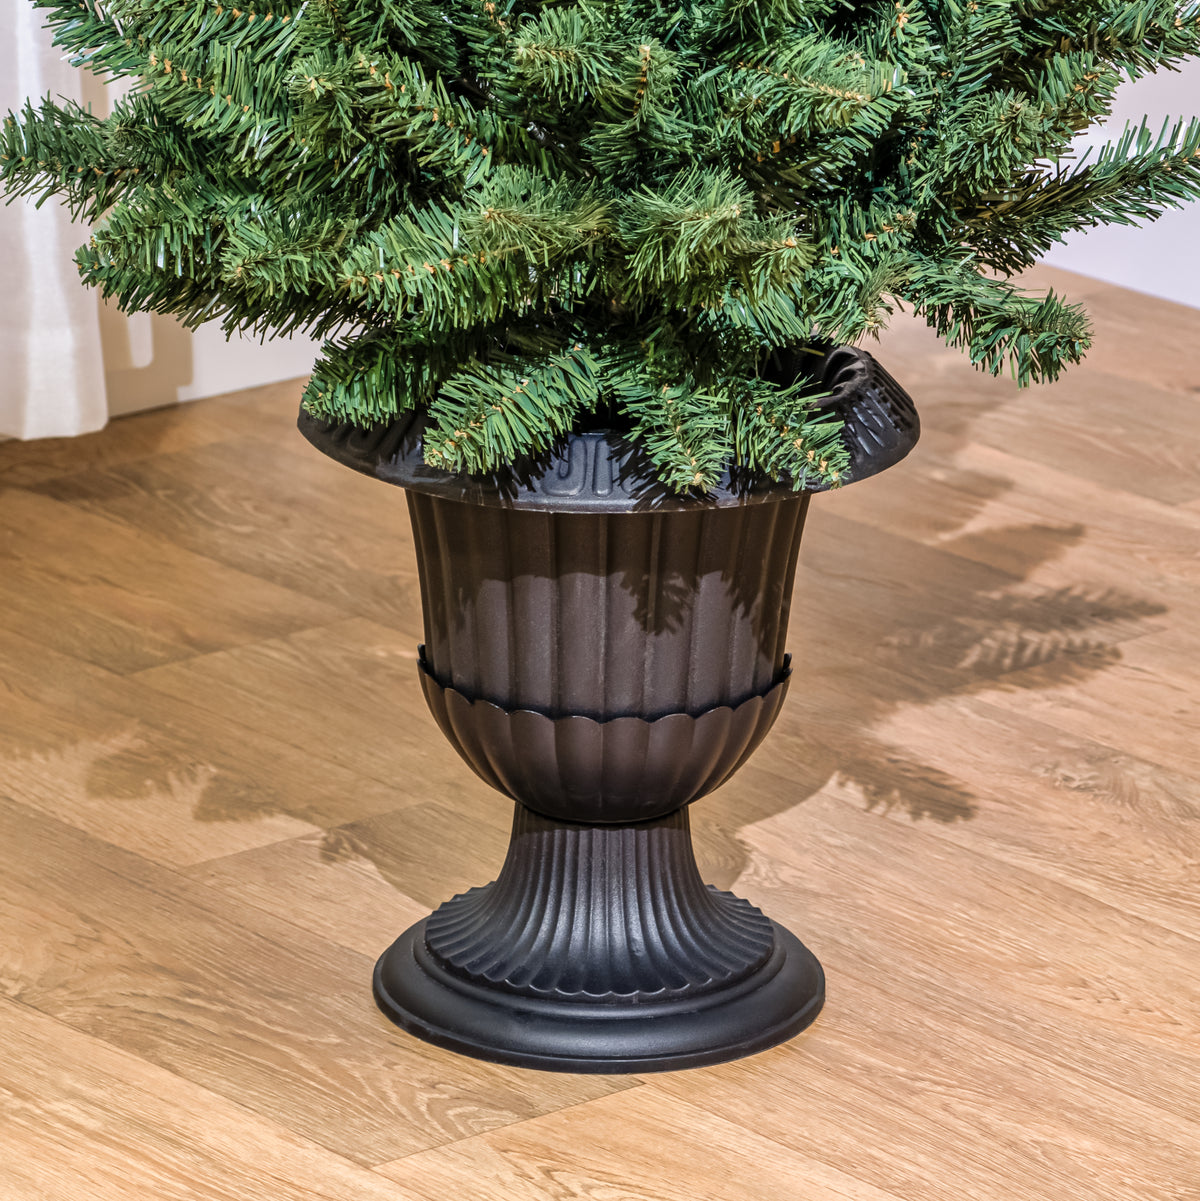 4ft - 5ft Potted Belgravia Spruce PE Artificial Christmas Tree